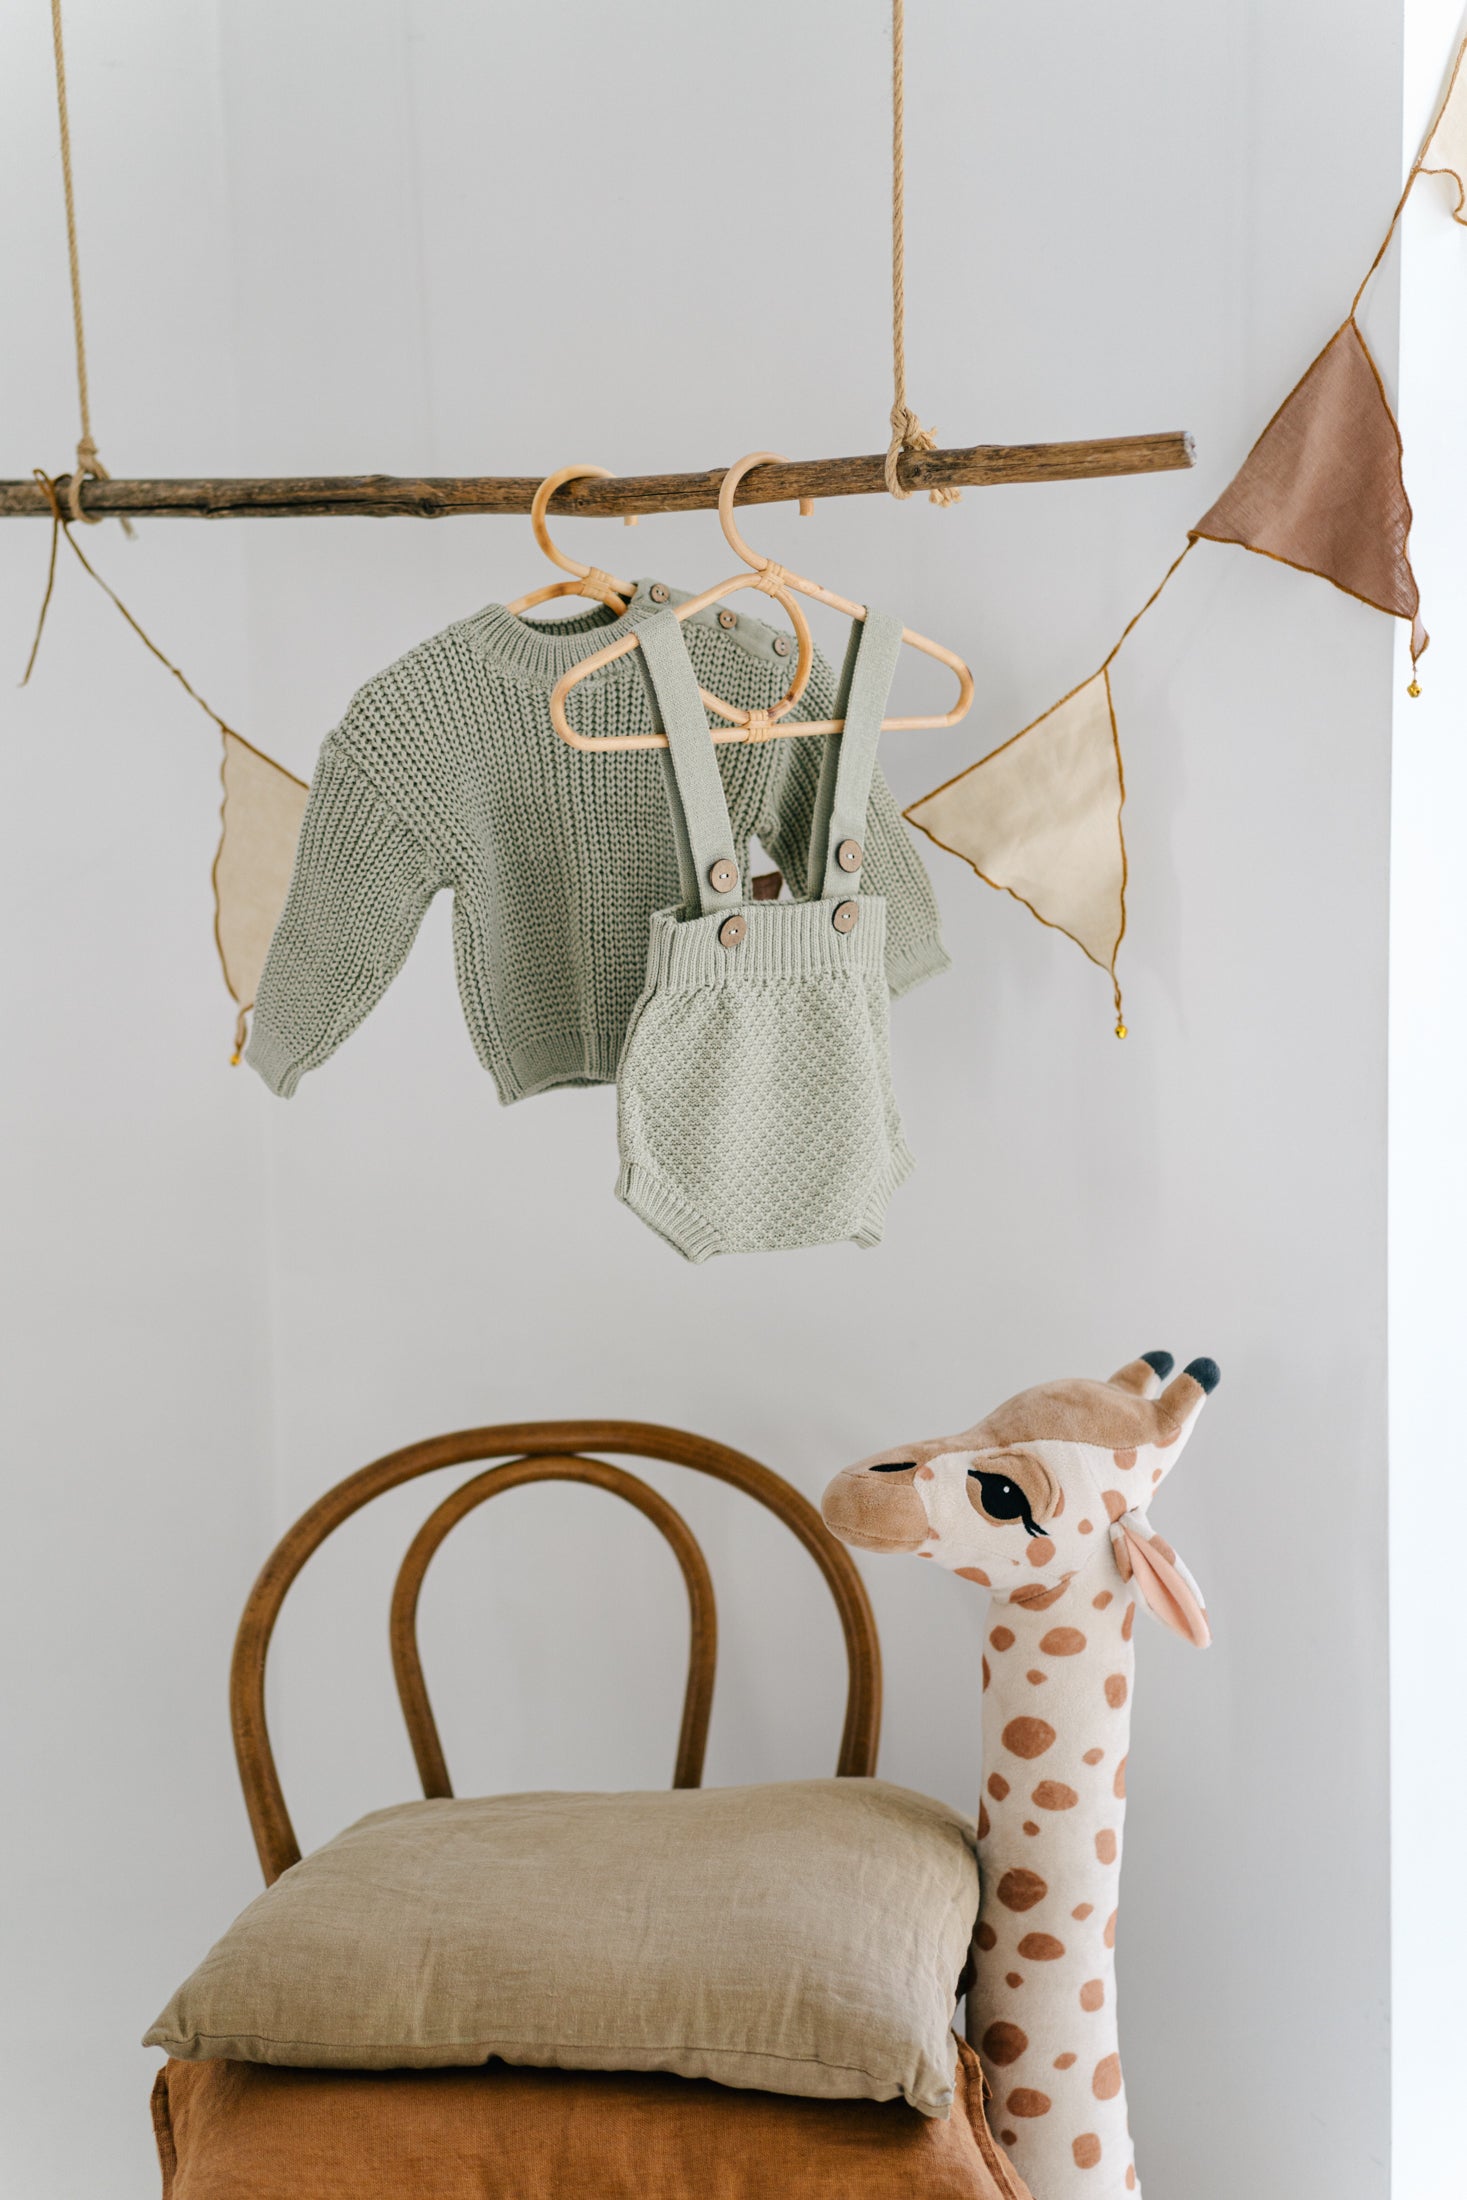 Baby Oversized Knit Sweater in green, newborn coming home outfit -baby knit sweater 0-3 months, newborn outfit bringing home,  my first outfit